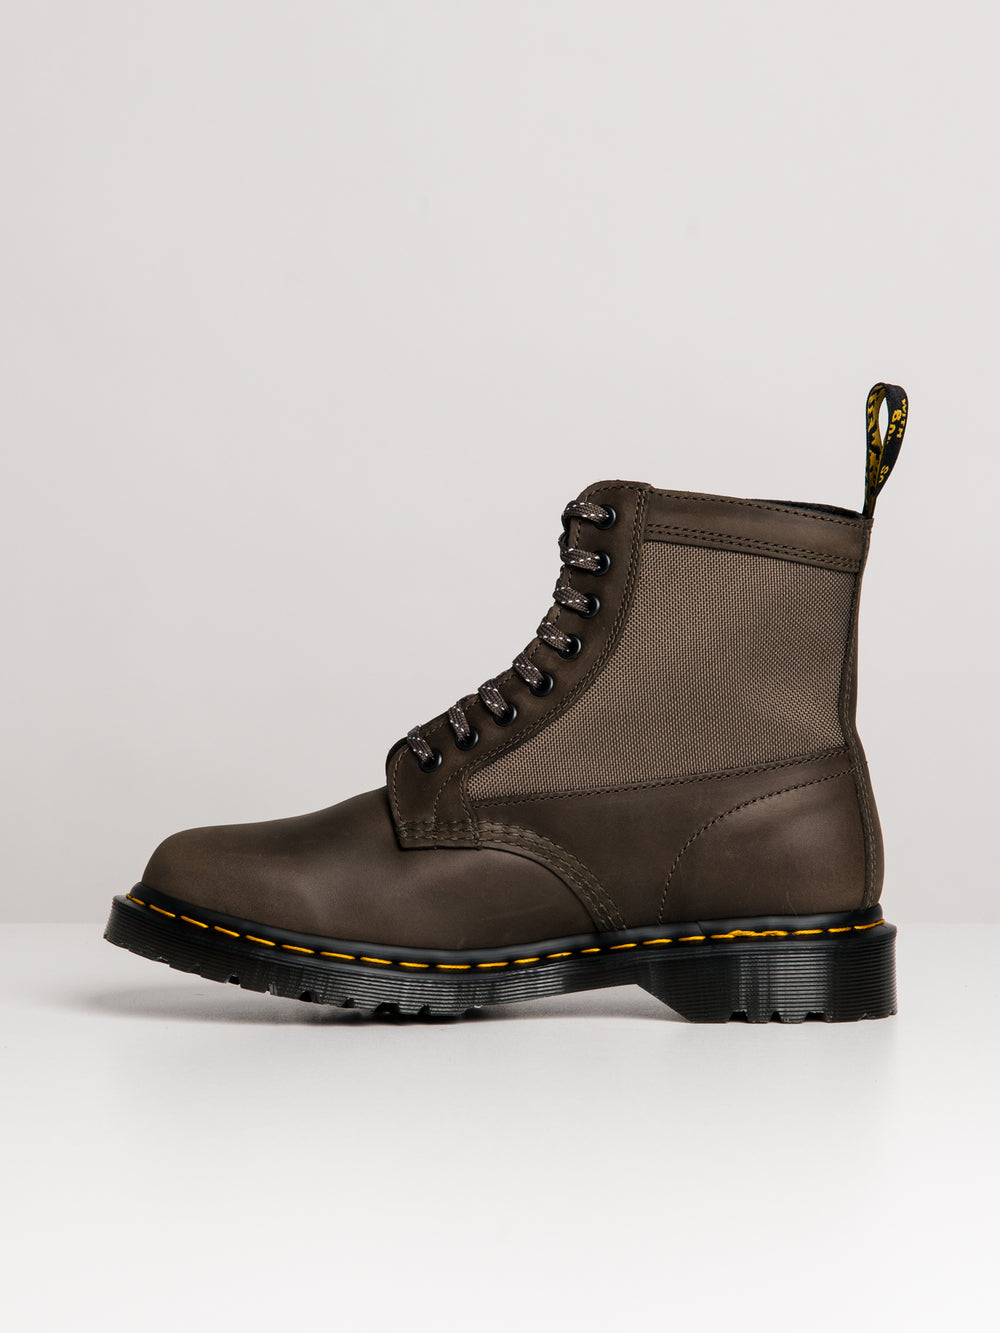 MENS DR MARTENS 1460 PANEL STREETER BOOT - CLEARANCE